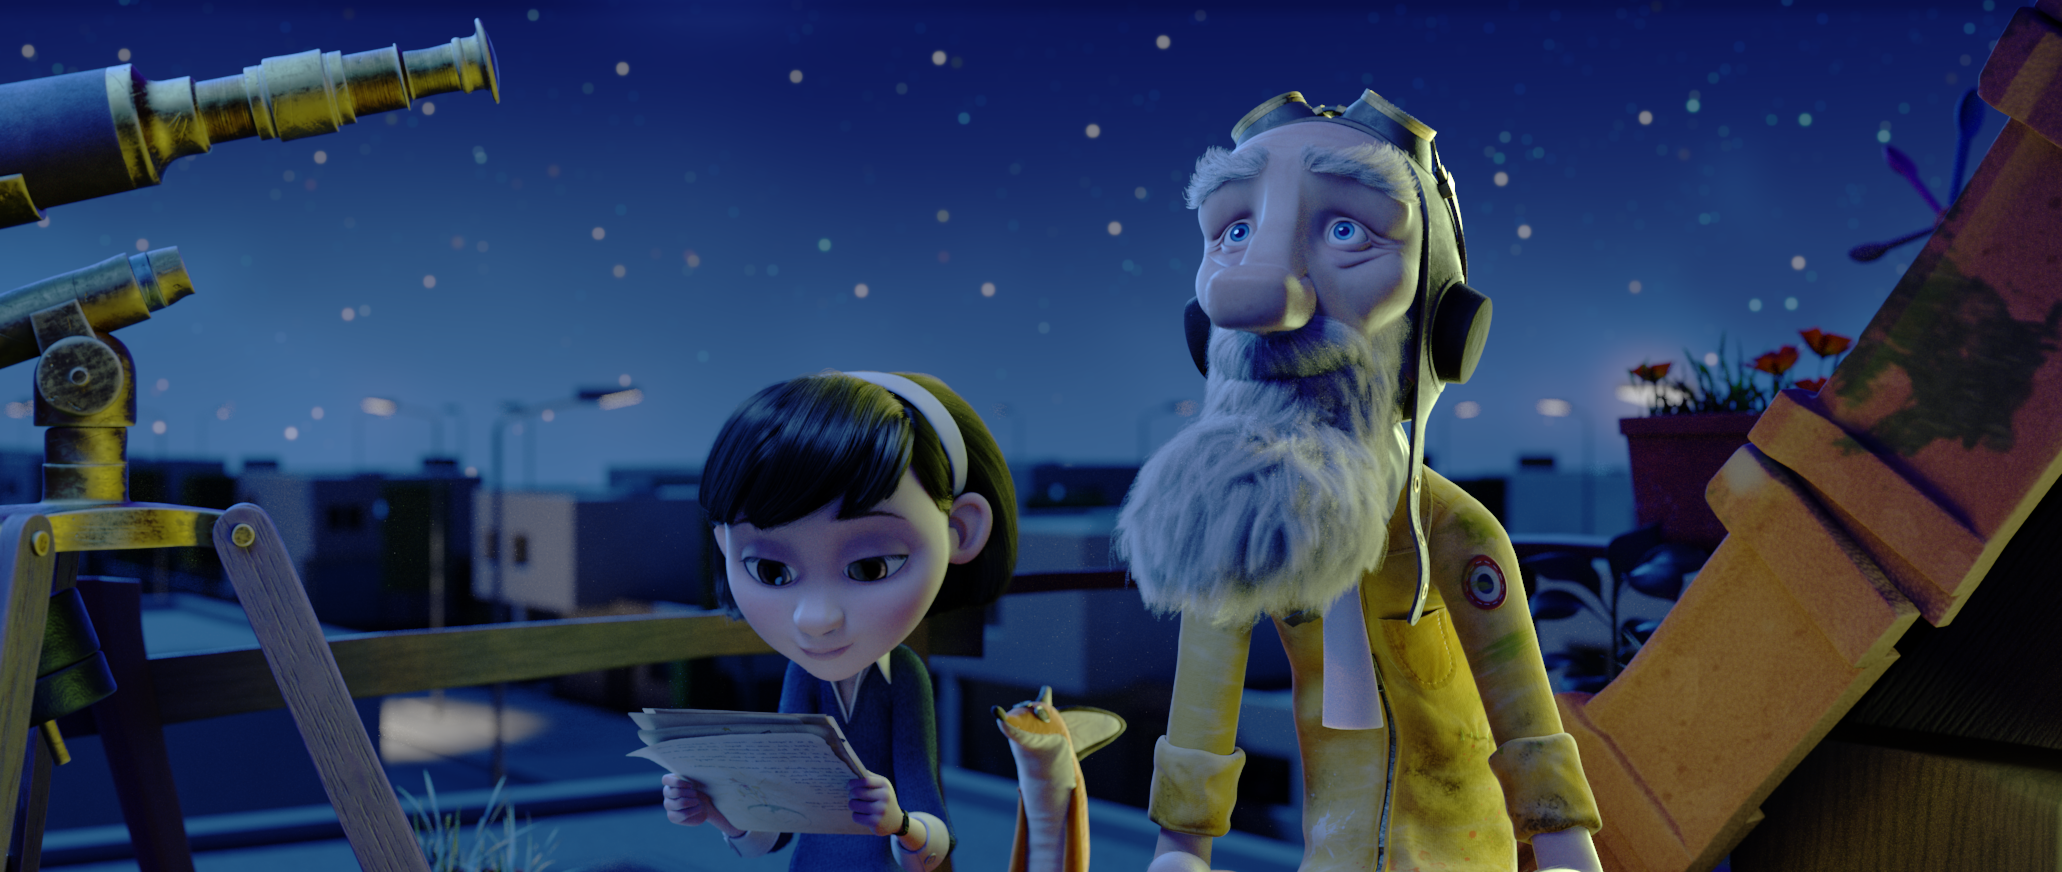 Movie The Little Prince HD Wallpaper | Background Image